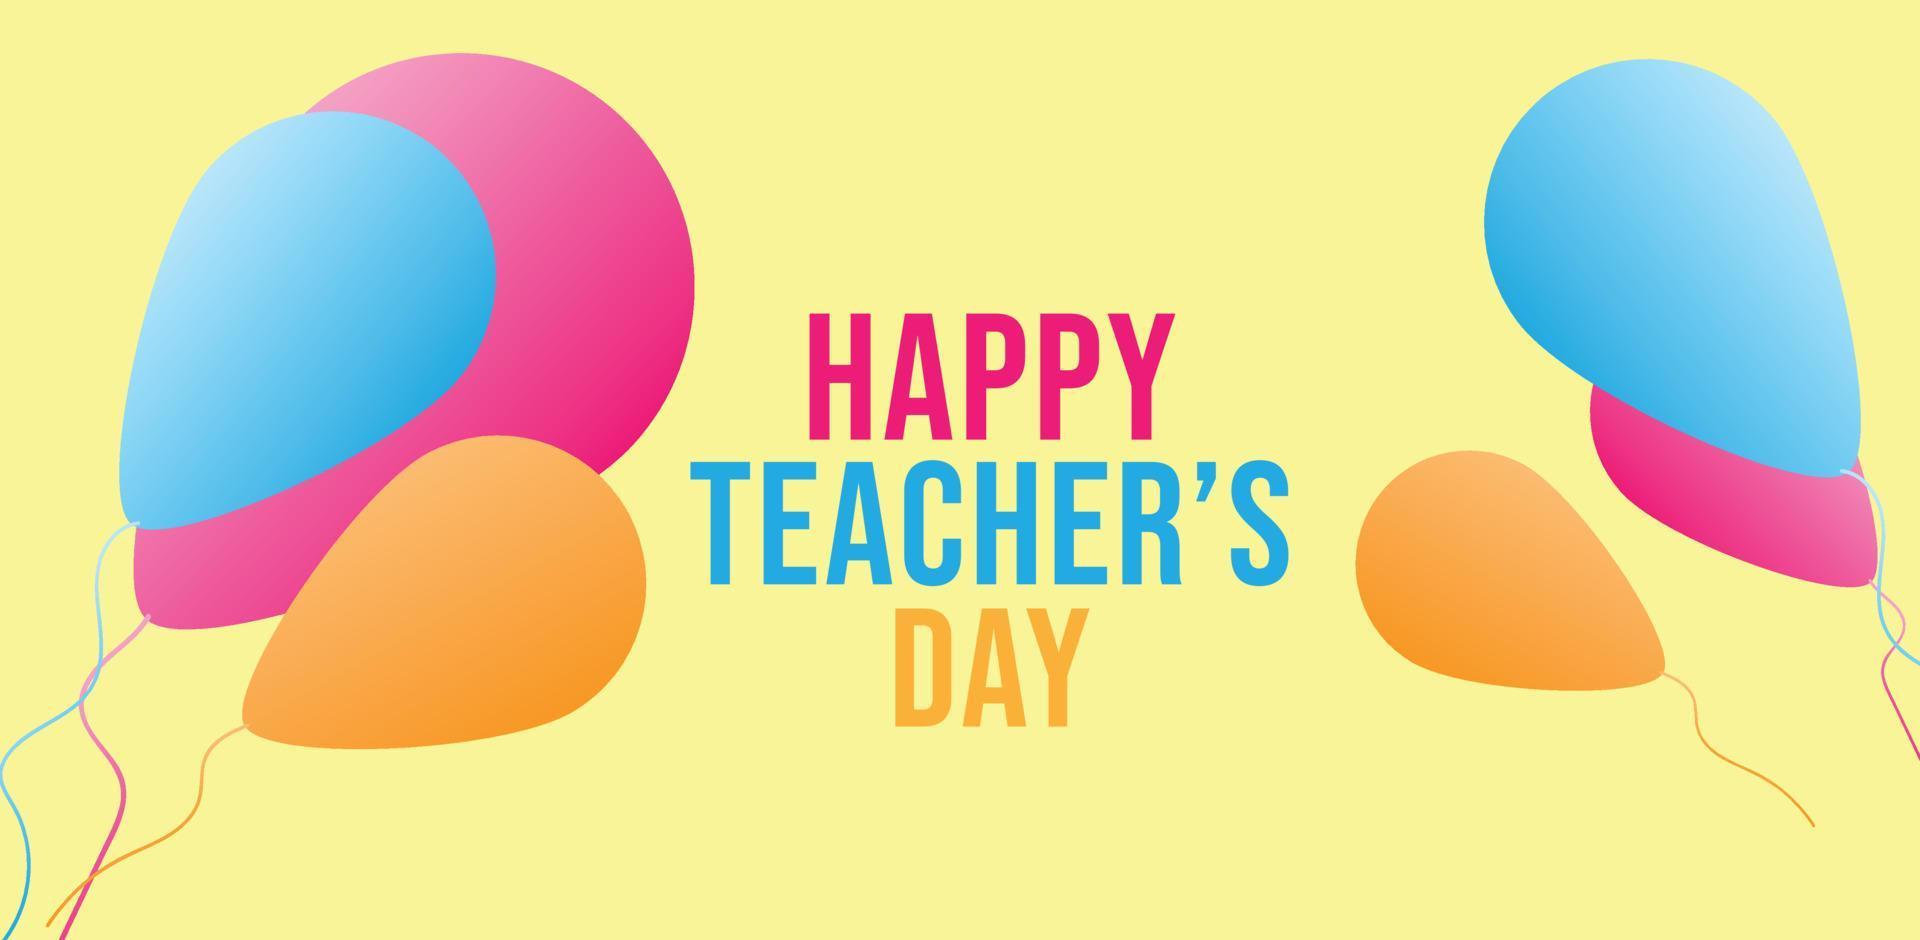 Happy Teacher's day. Template for background, banner, card, poster. vector illustration.